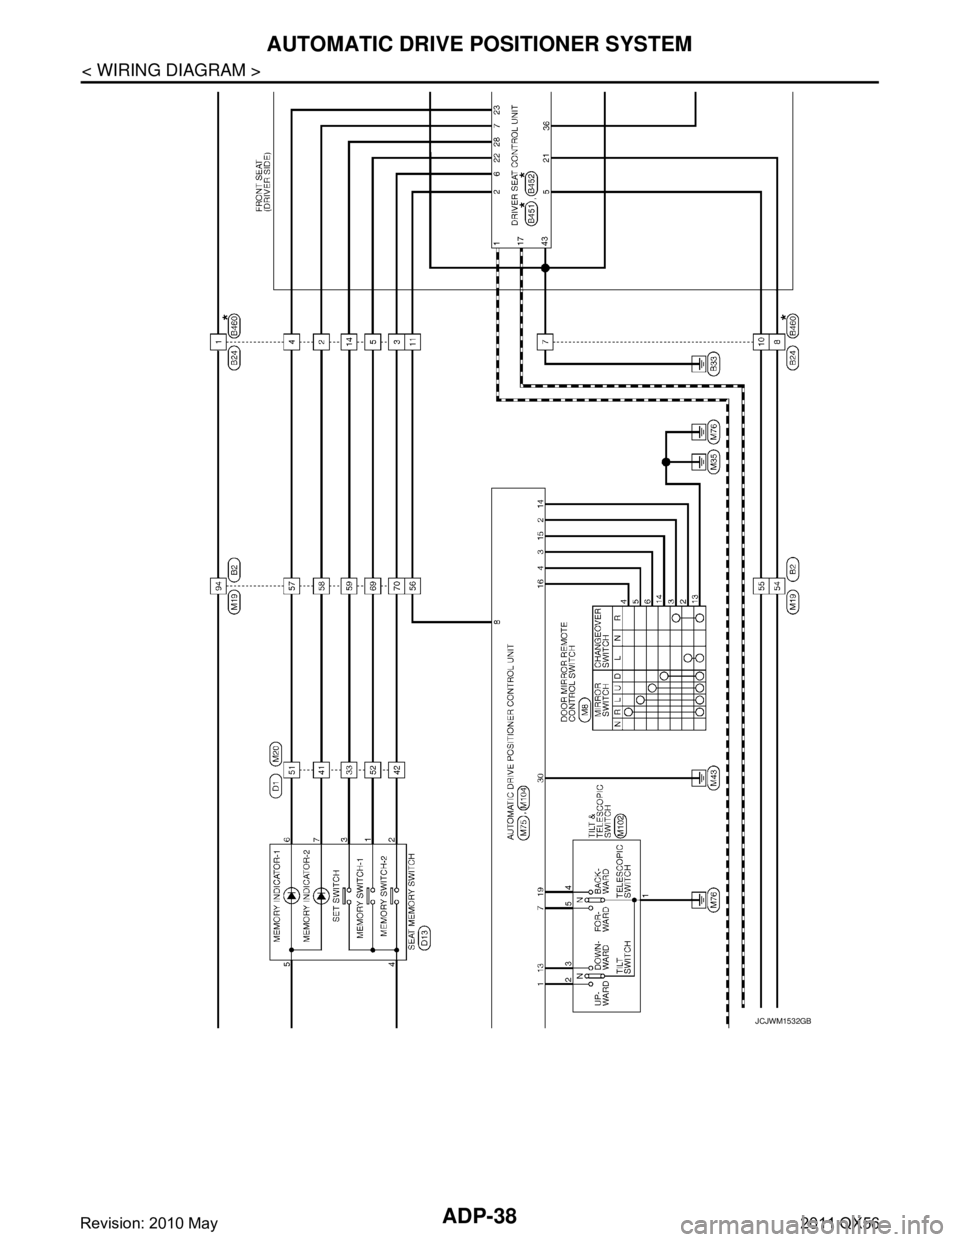 INFINITI QX56 2011  Factory Service Manual 
ADP-38
< WIRING DIAGRAM >
AUTOMATIC DRIVE POSITIONER SYSTEM
JCJWM1532GB
Revision: 2010 May2011 QX56  